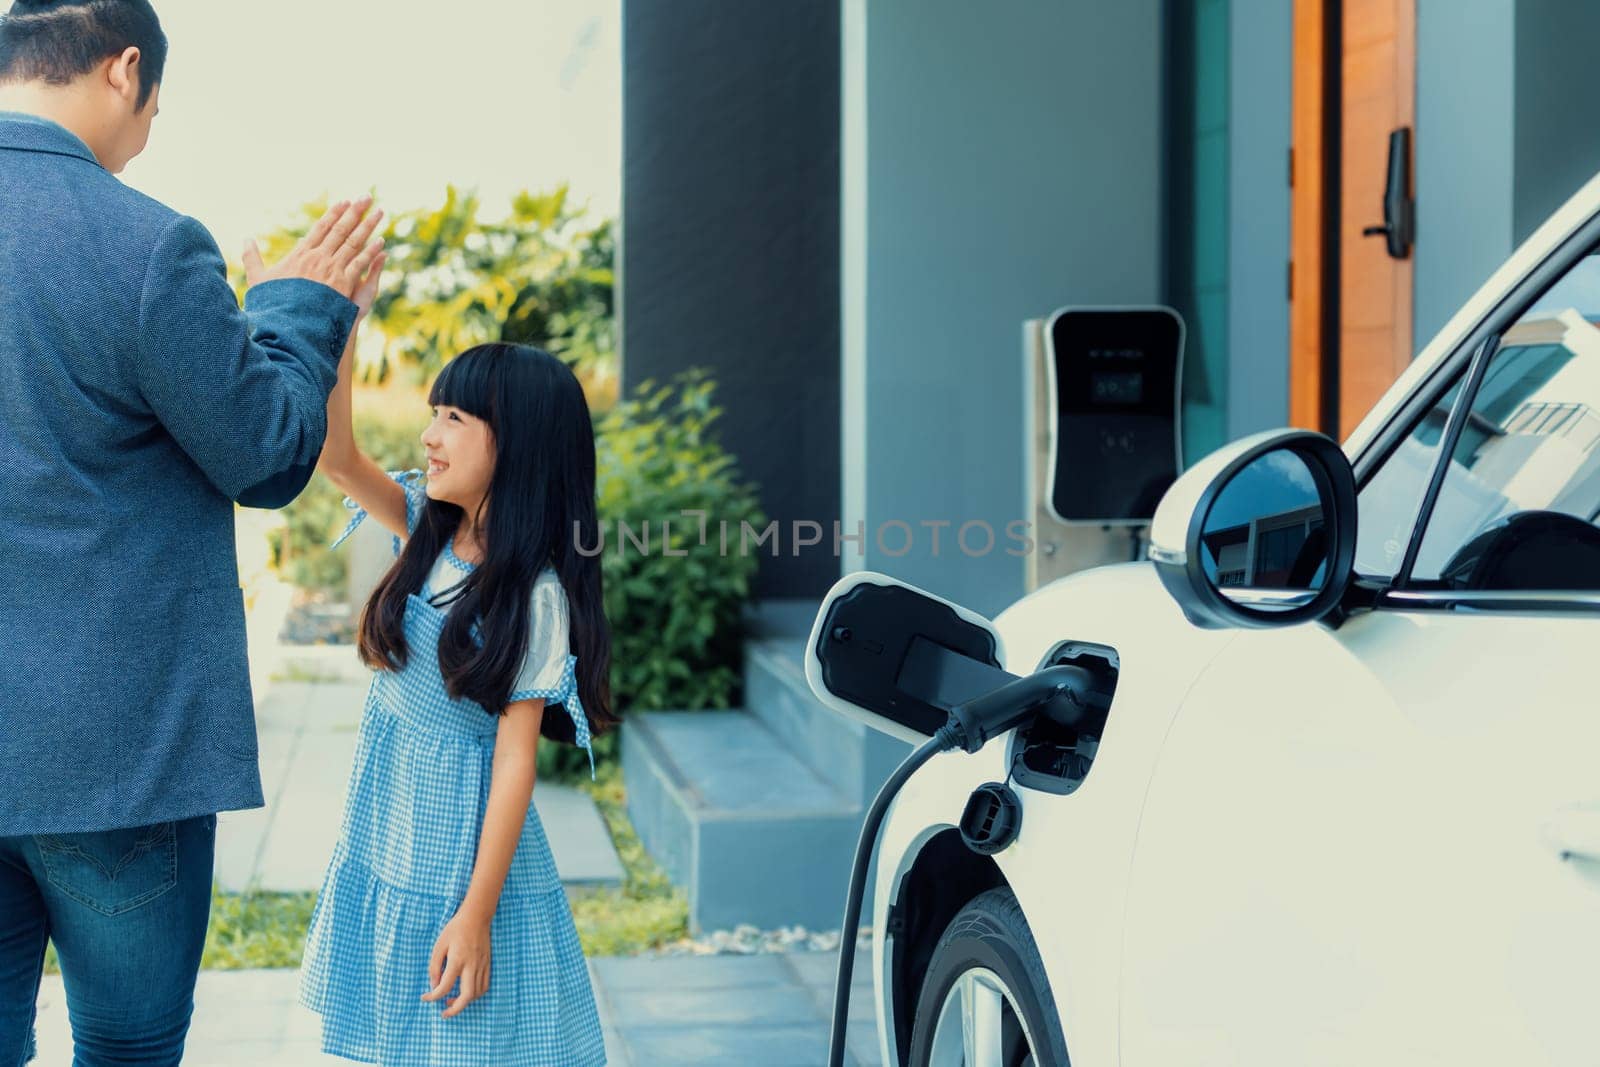 Progressive father and daughter returned from school in electric vehicle that is being charged at home. Electric vehicle driven by renewable clean energy. Home charging station concept for environment